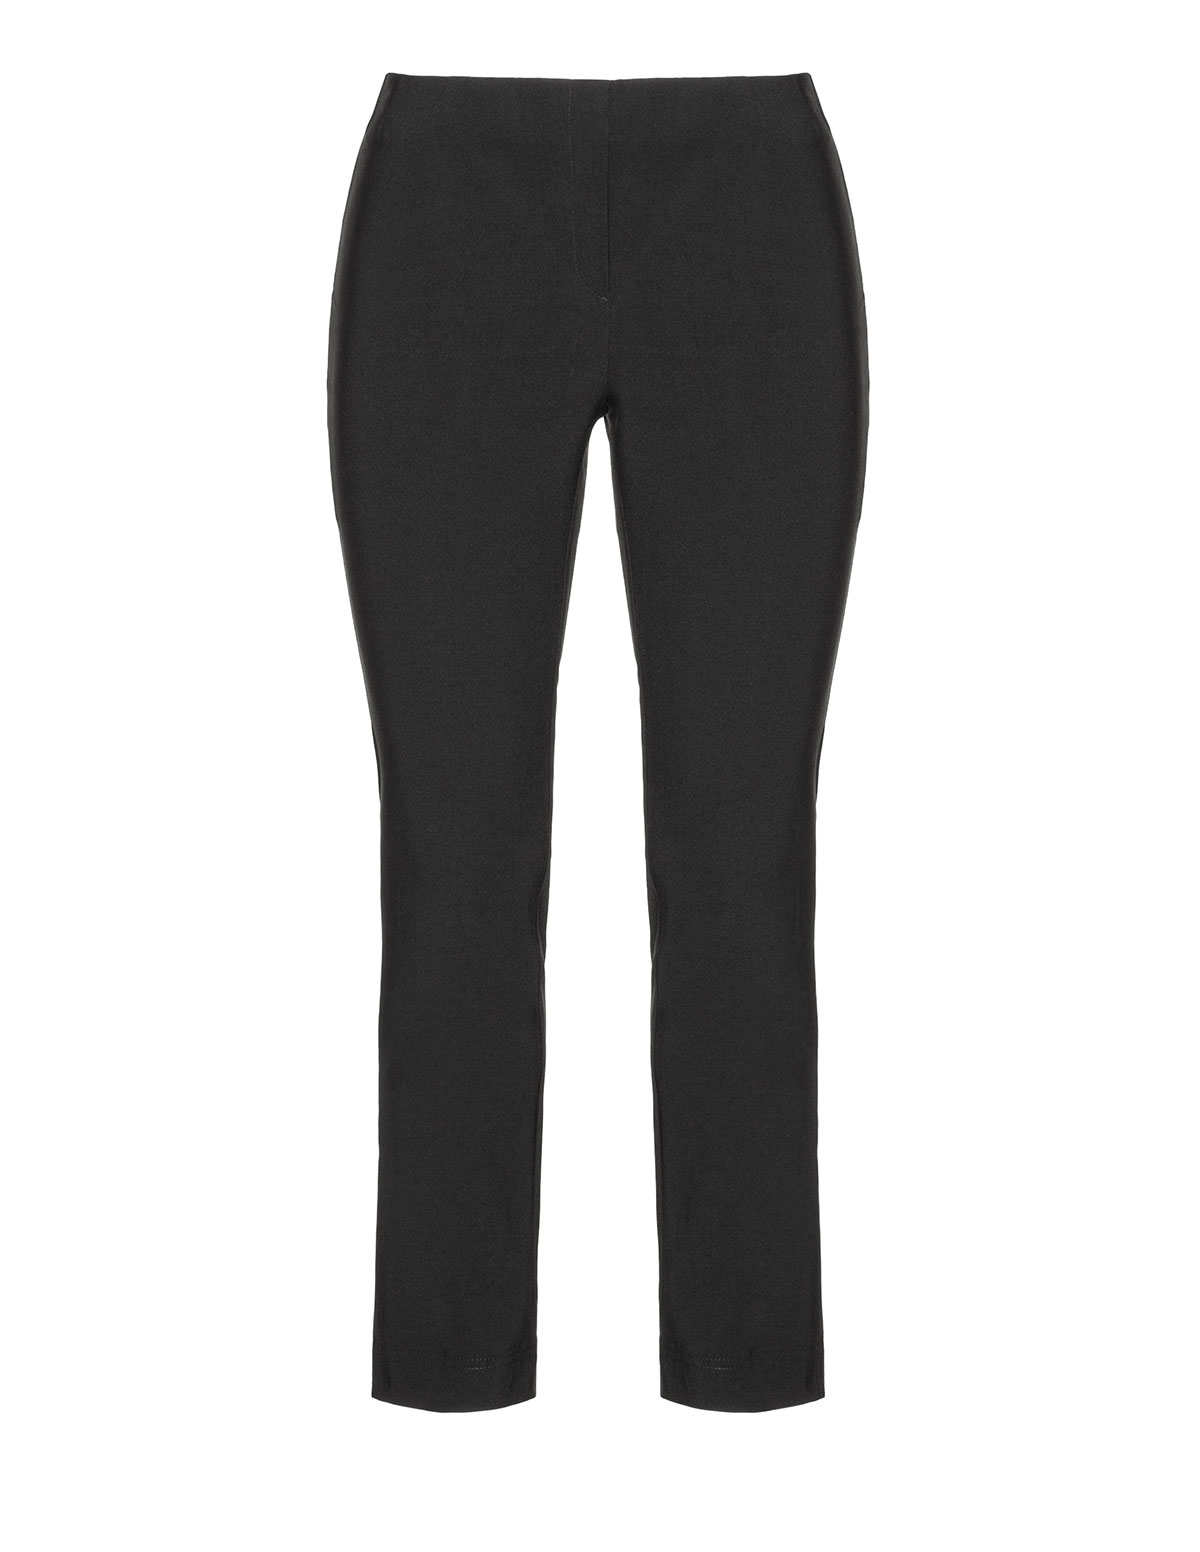 Helen Shape Collection trousers by
Manon Baptiste